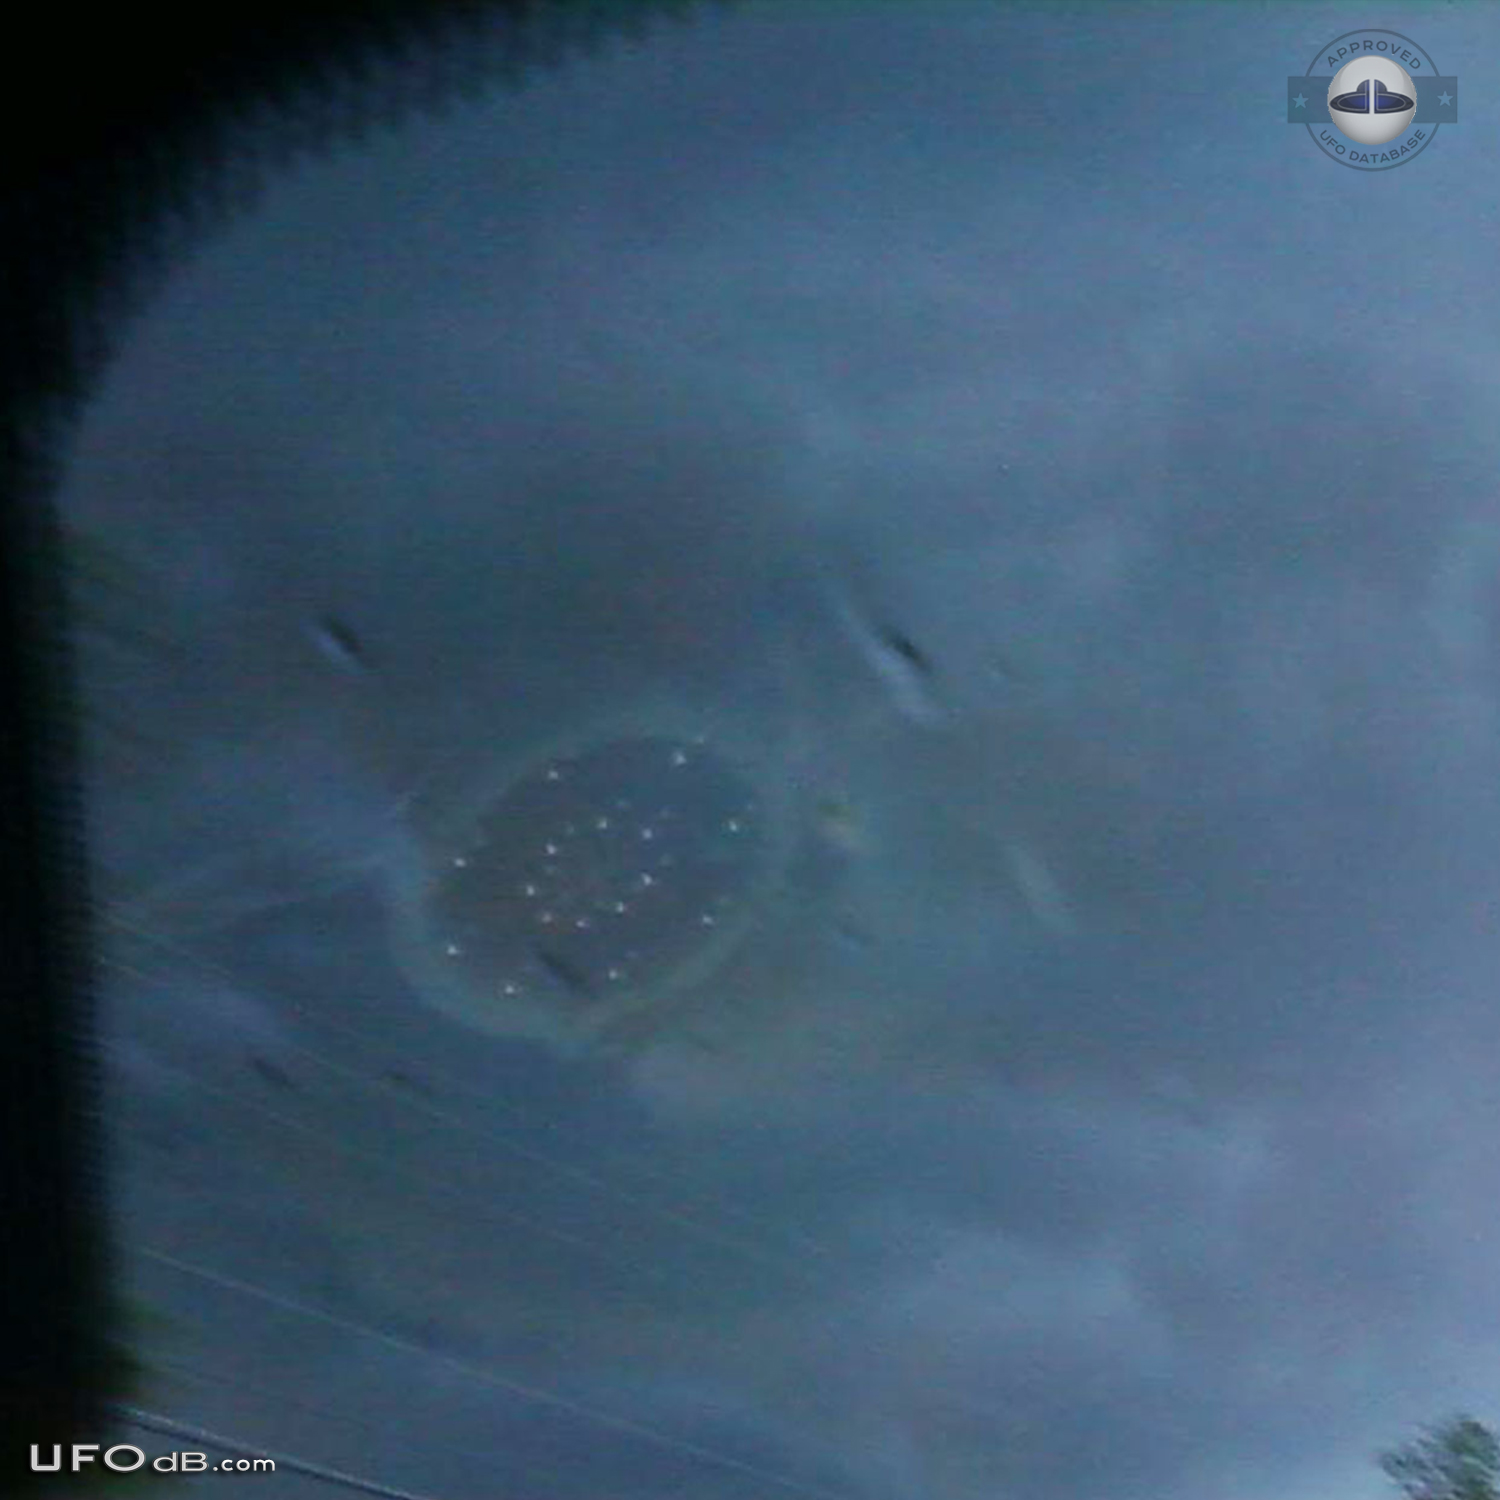 Large saucer ufo appears through dark stormy clouds - Malone, New York UFO Picture #414-2